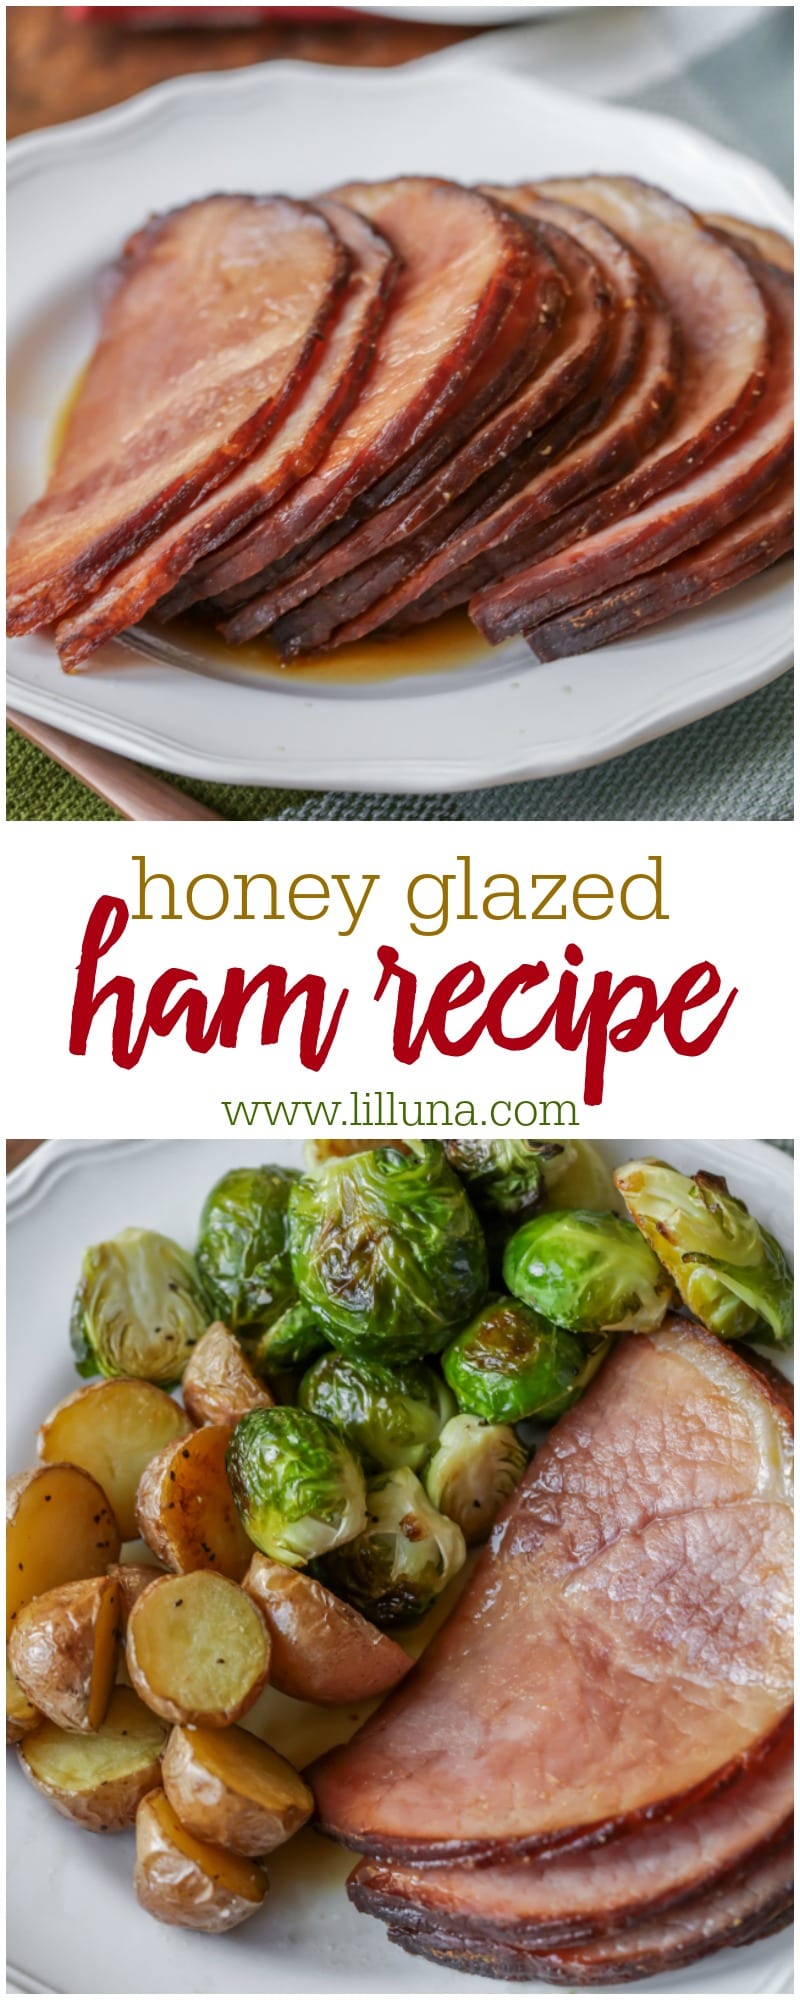 Sam’s Choice Crock Pot Ham + Roasted Brussels Sprouts + Roasted Red Potatoes = perfect meal! All of these recipes are simple, delicious and perfect for the holidays. @Walmart #sponsored #RockThisChristmas #foodie